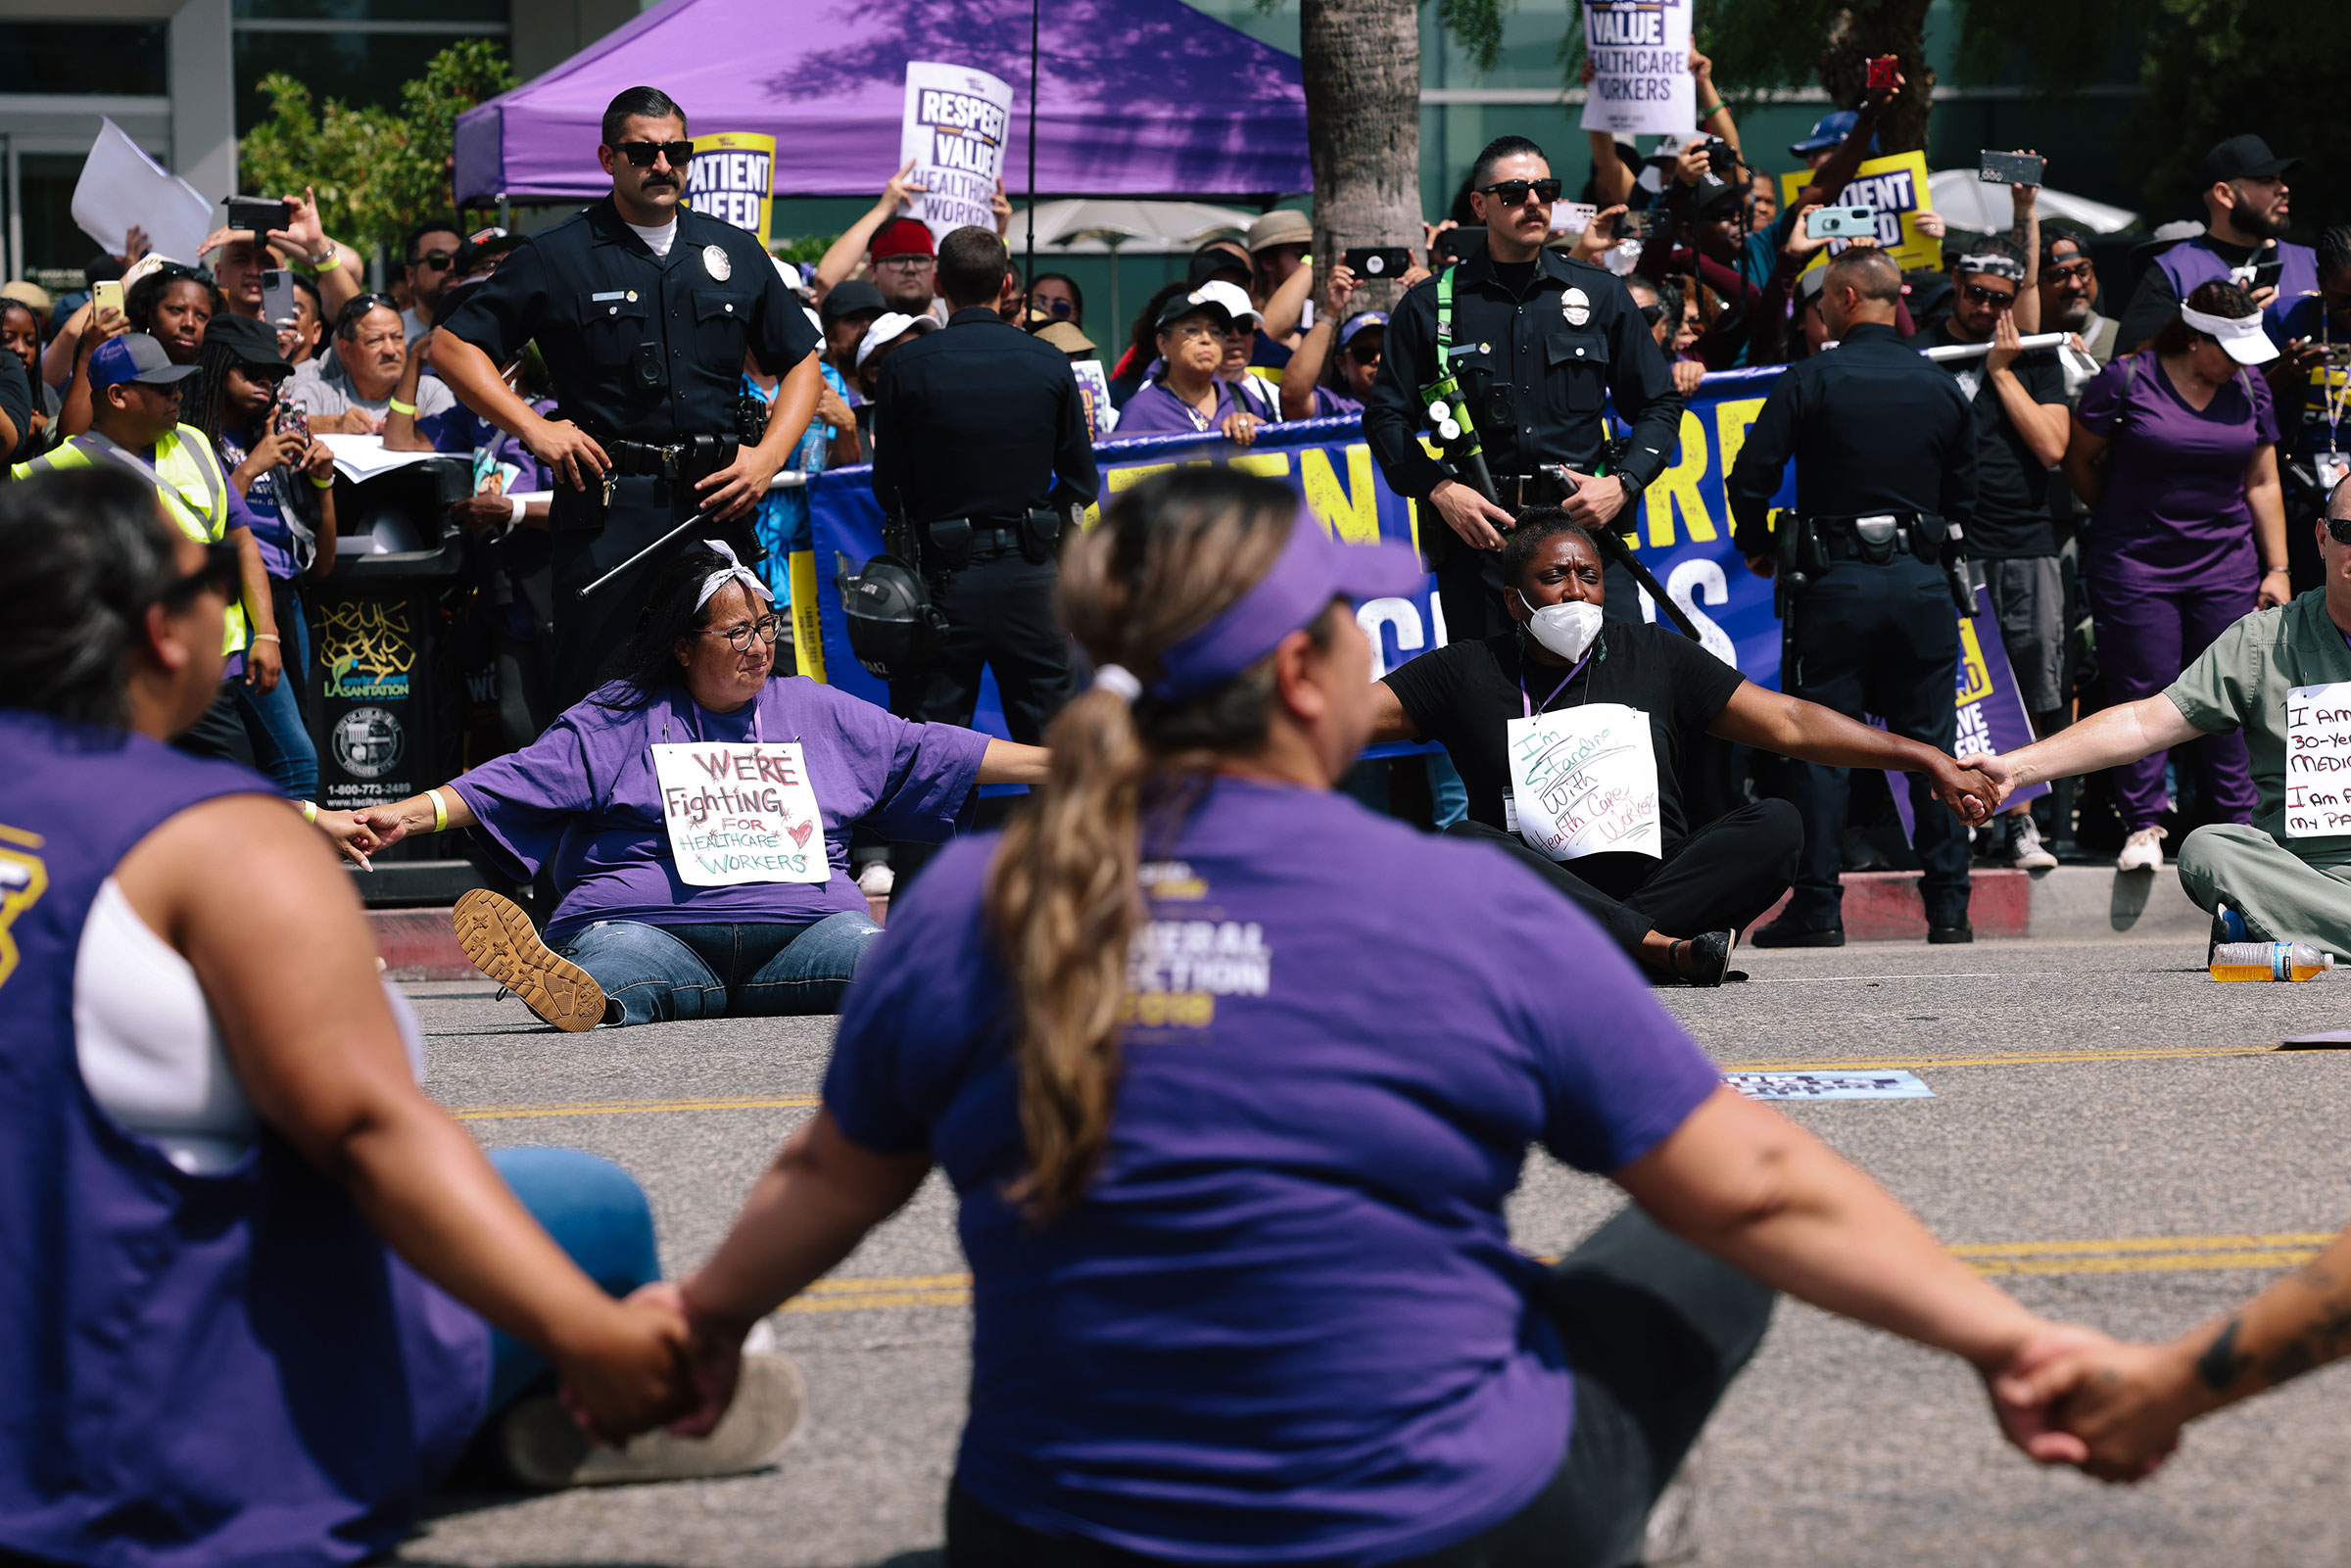 Healthcare workers, all dressed in purple shirts, sit in a street and hold hands in a circle as police officers stand watch in front of more purple-clad protesters holding a banner on a nearby sidewalk